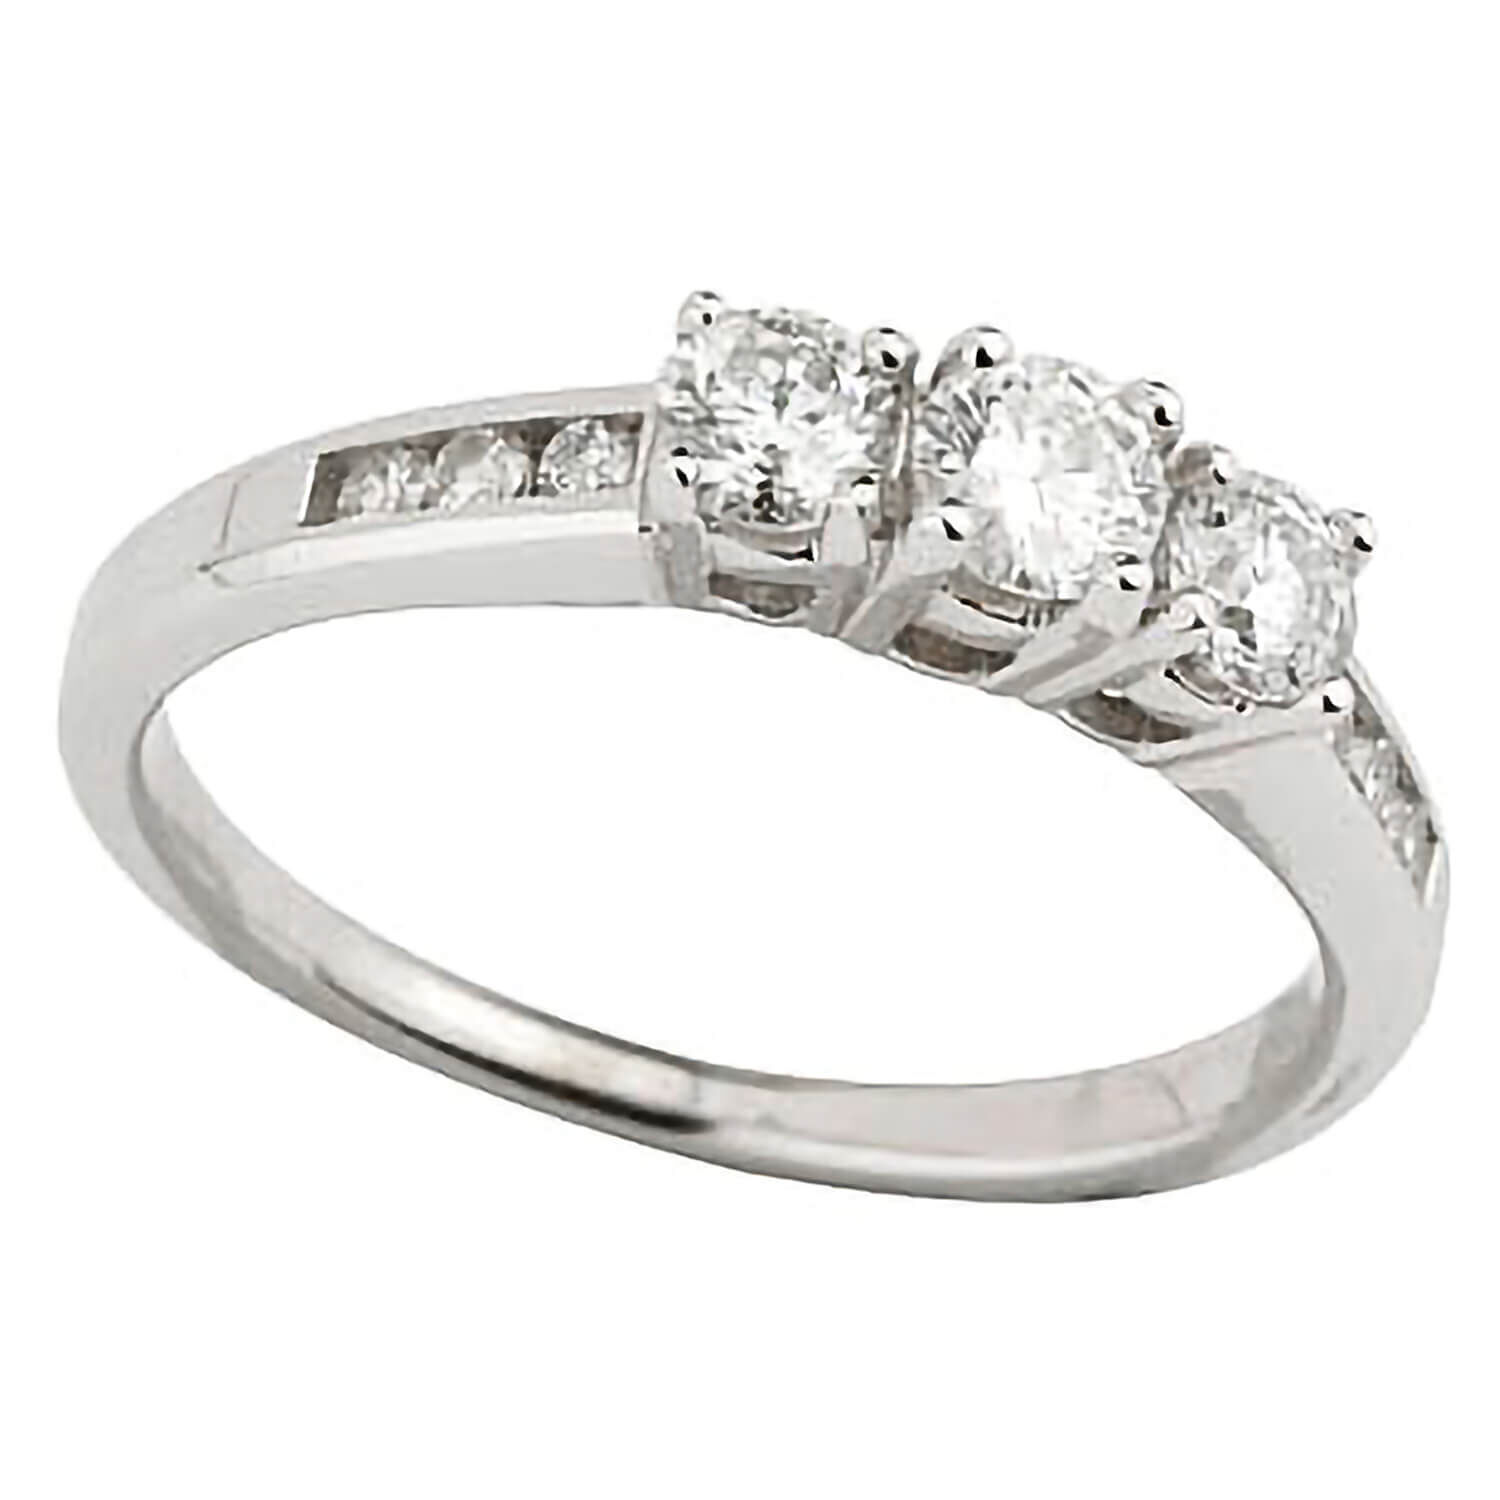 Northern Star Engagement Rings | Fraser Hart Jewellers